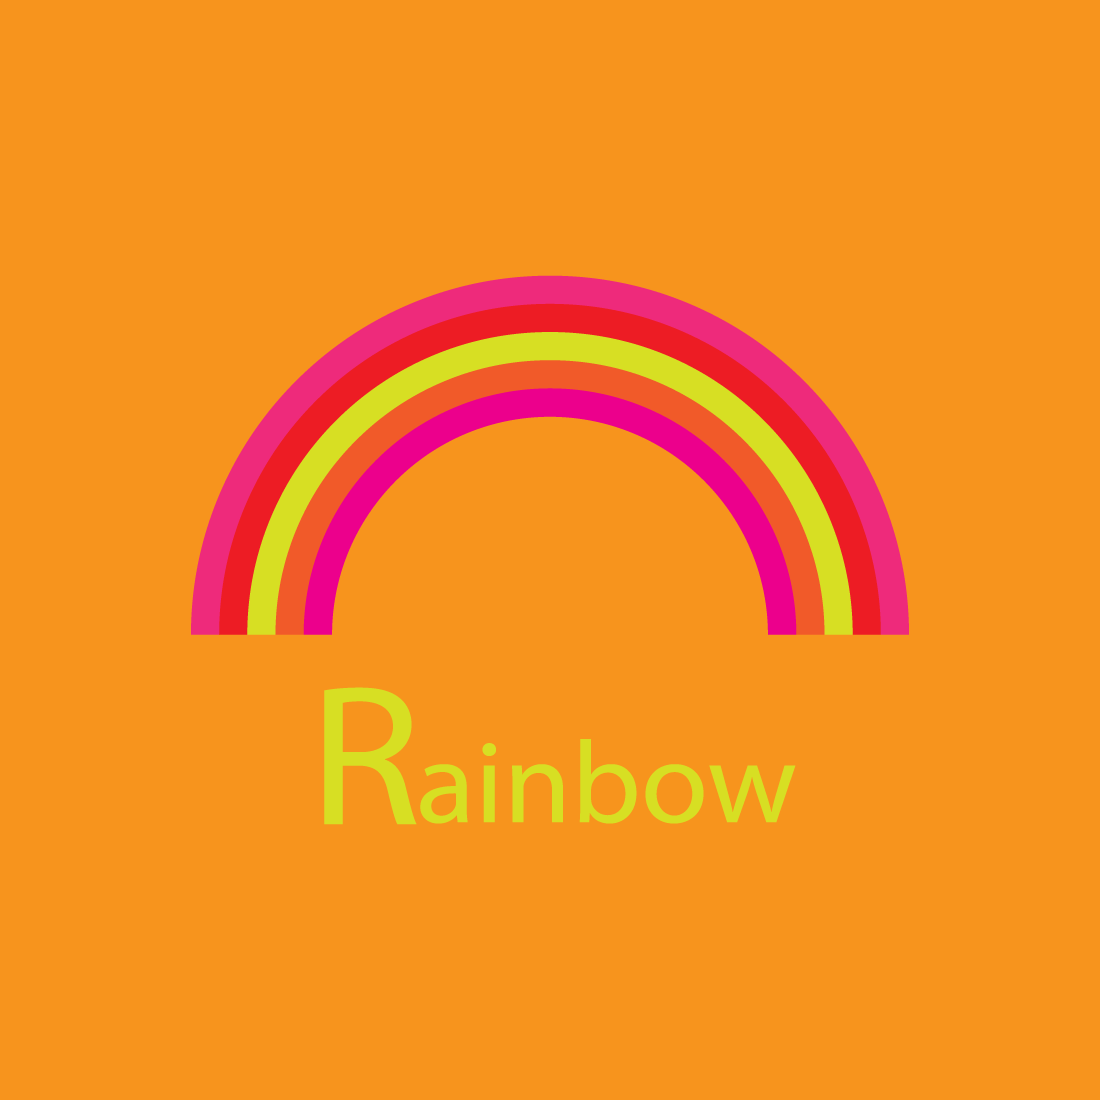 A Rainbow Illustrations preview image.